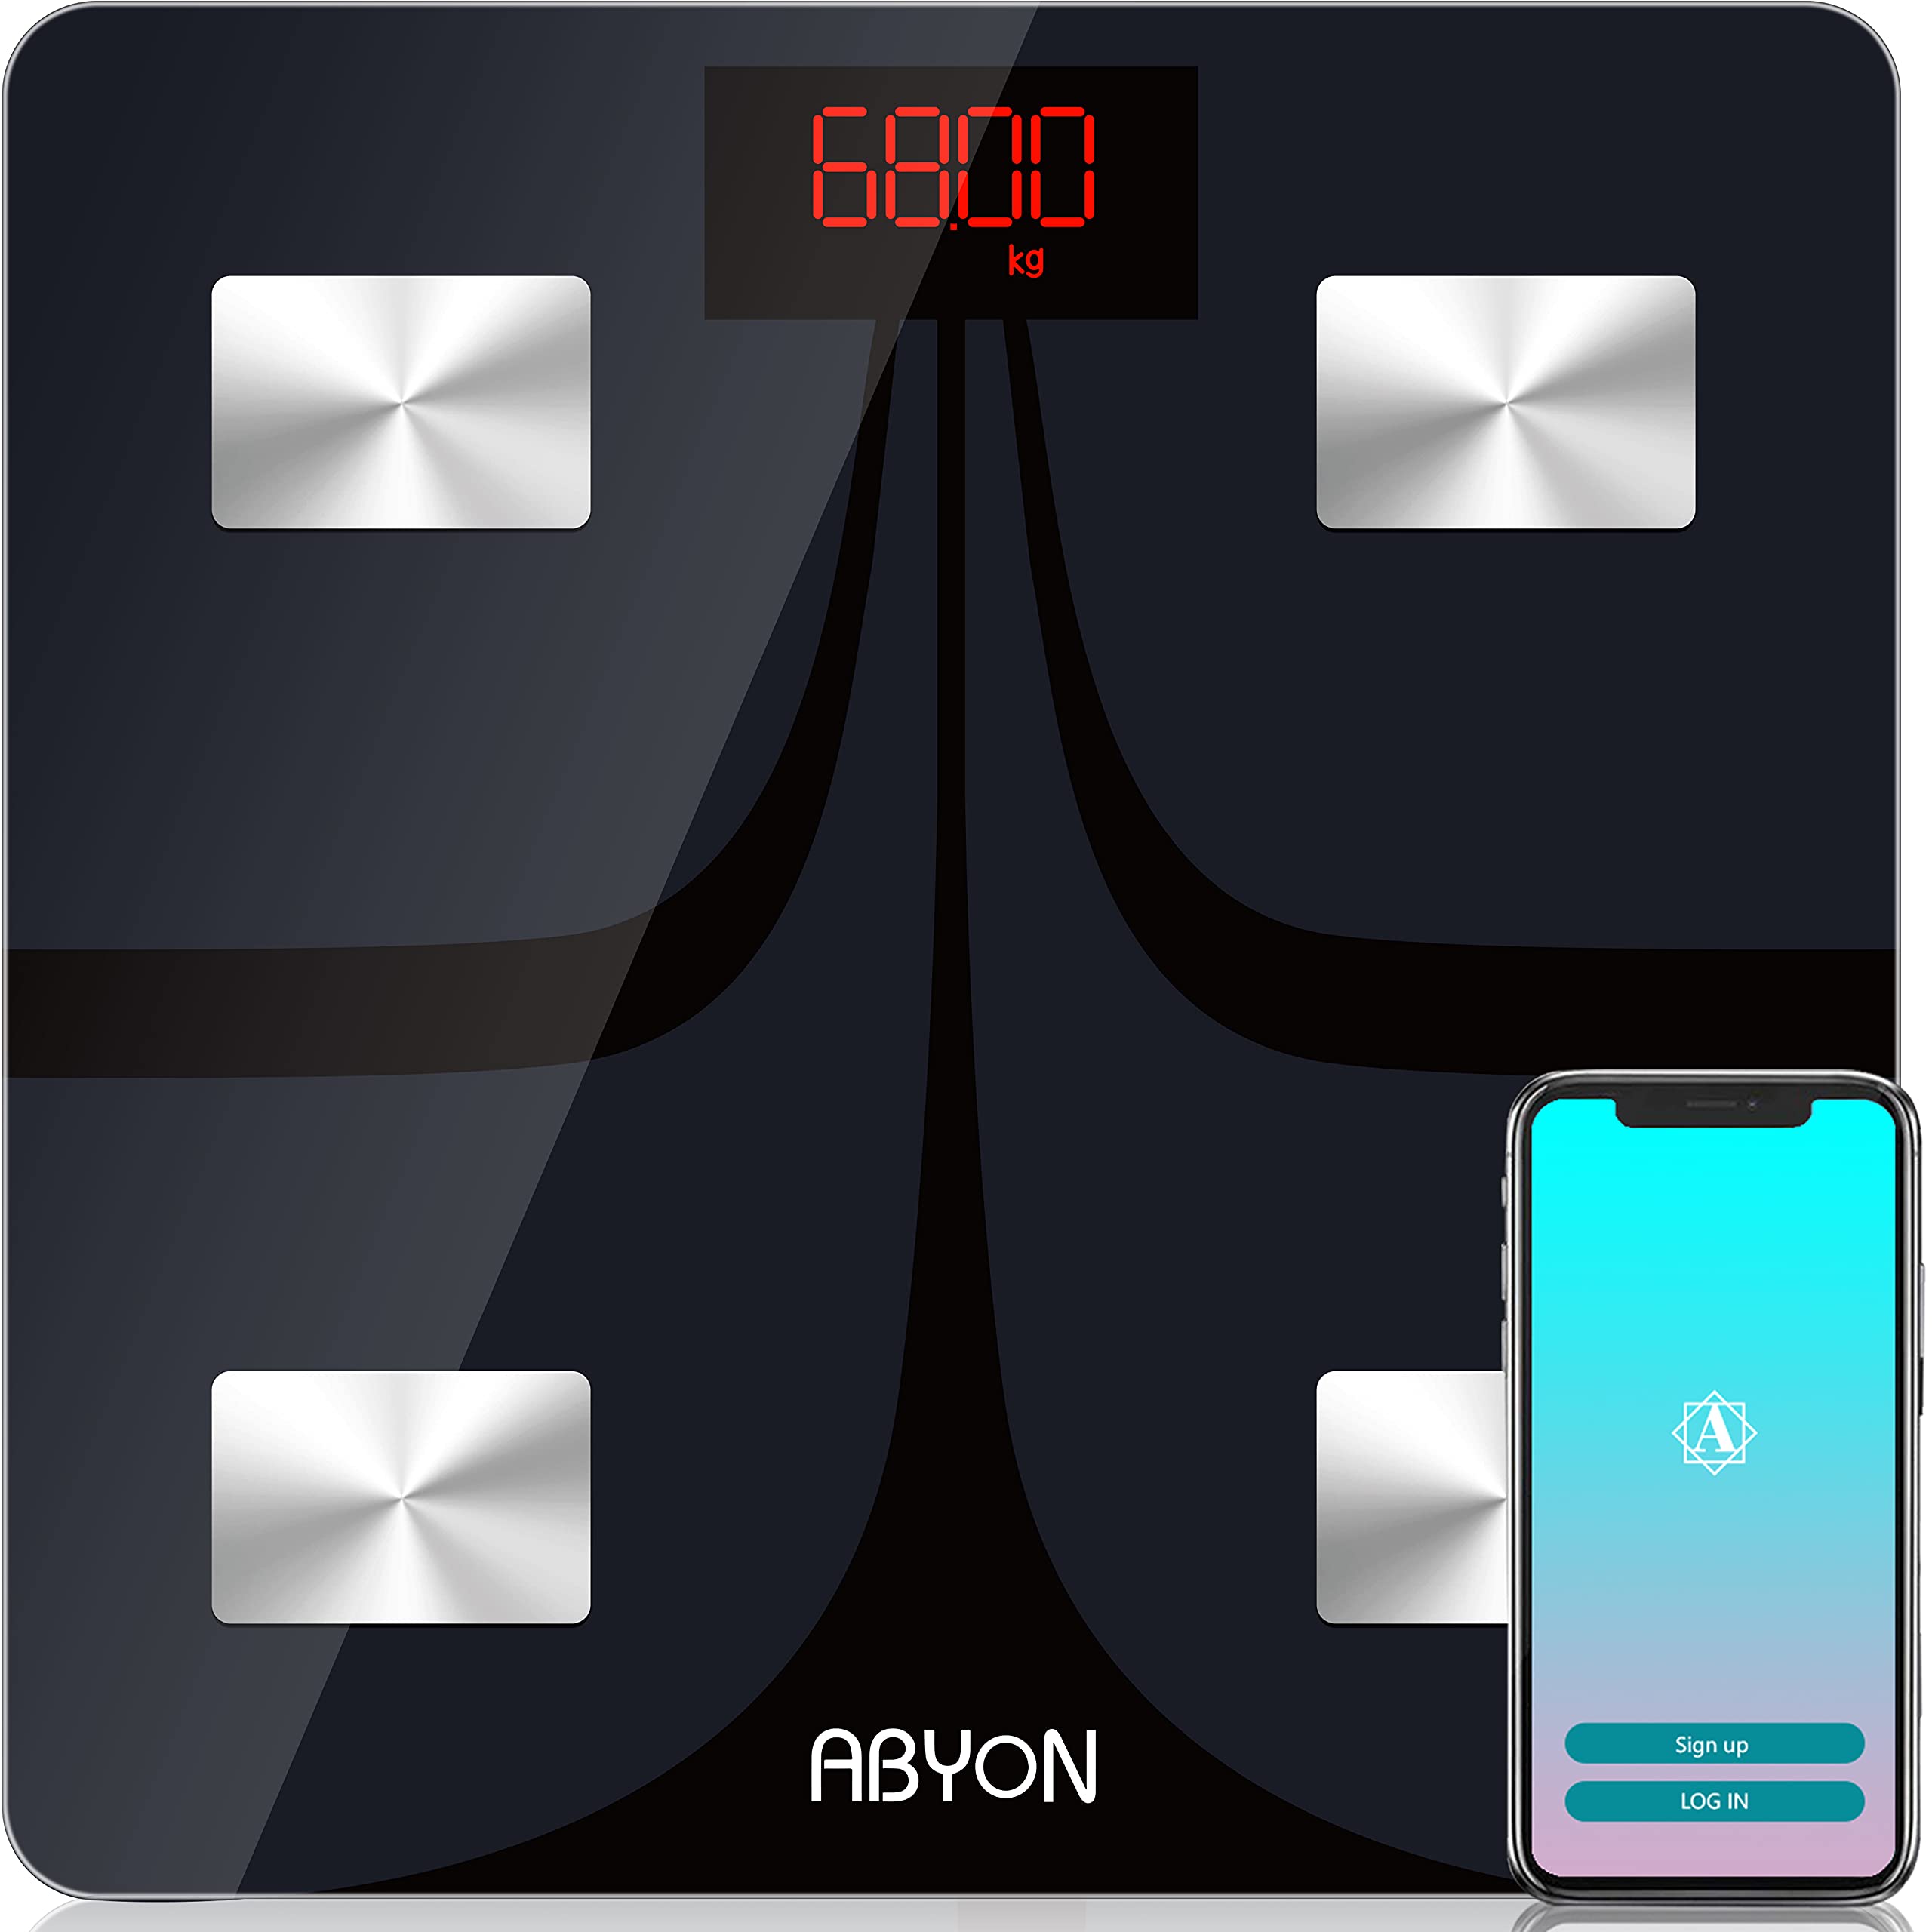 ABYON Bluetooth Smart Bathroom Scale for Body Weight Digital Body Fat Scale,Auto  Monitor Body Weight